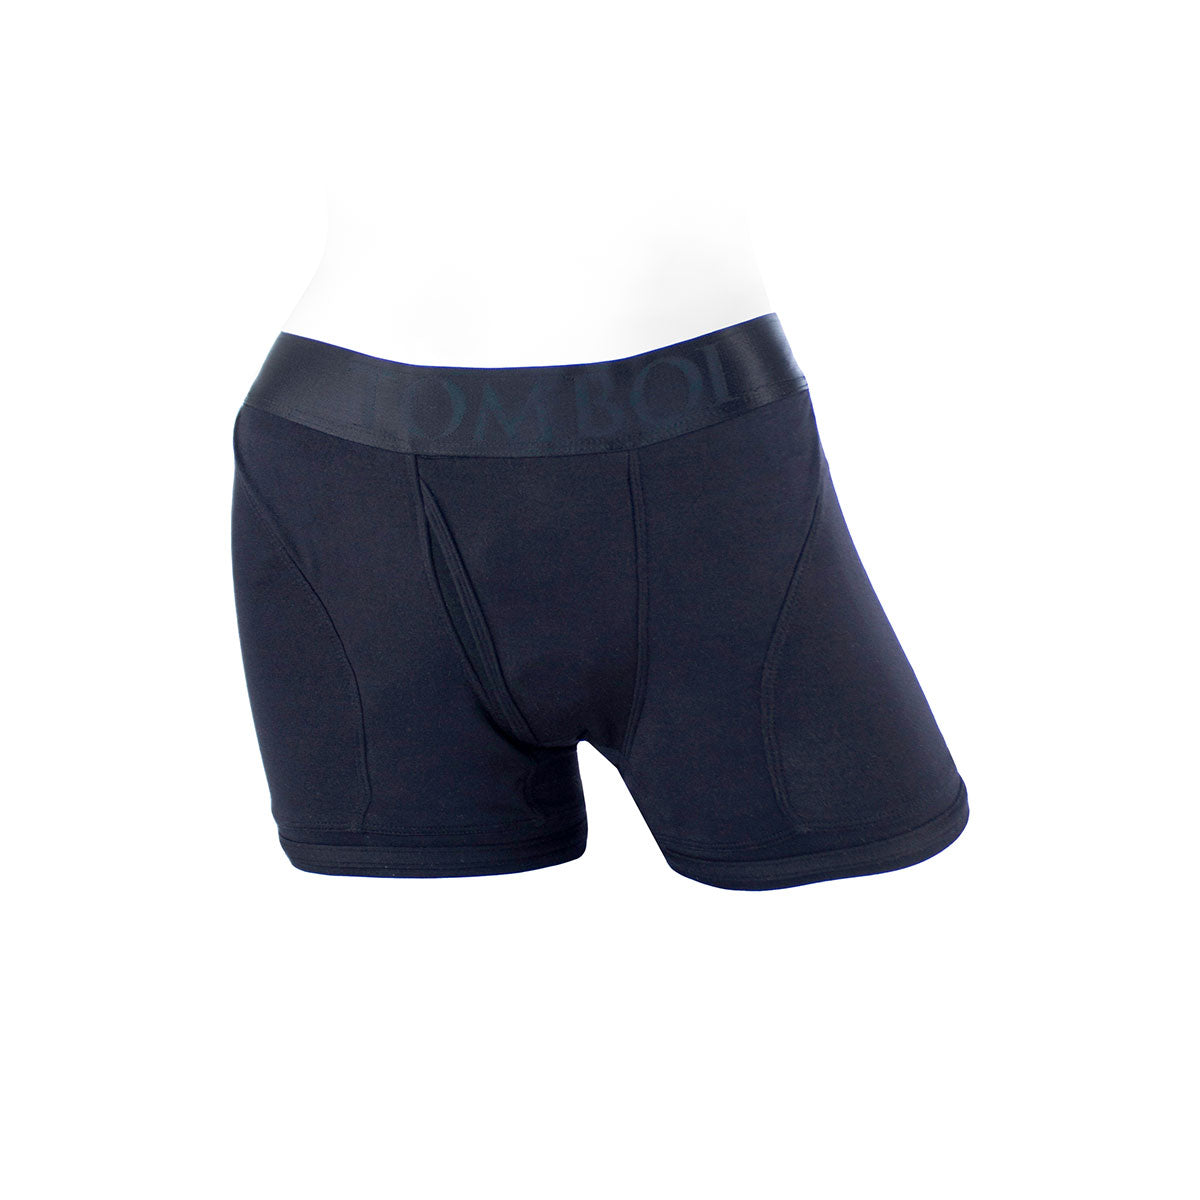 SpareParts Tomboii Black-Black Rayon - Small Intimates Adult Boutique